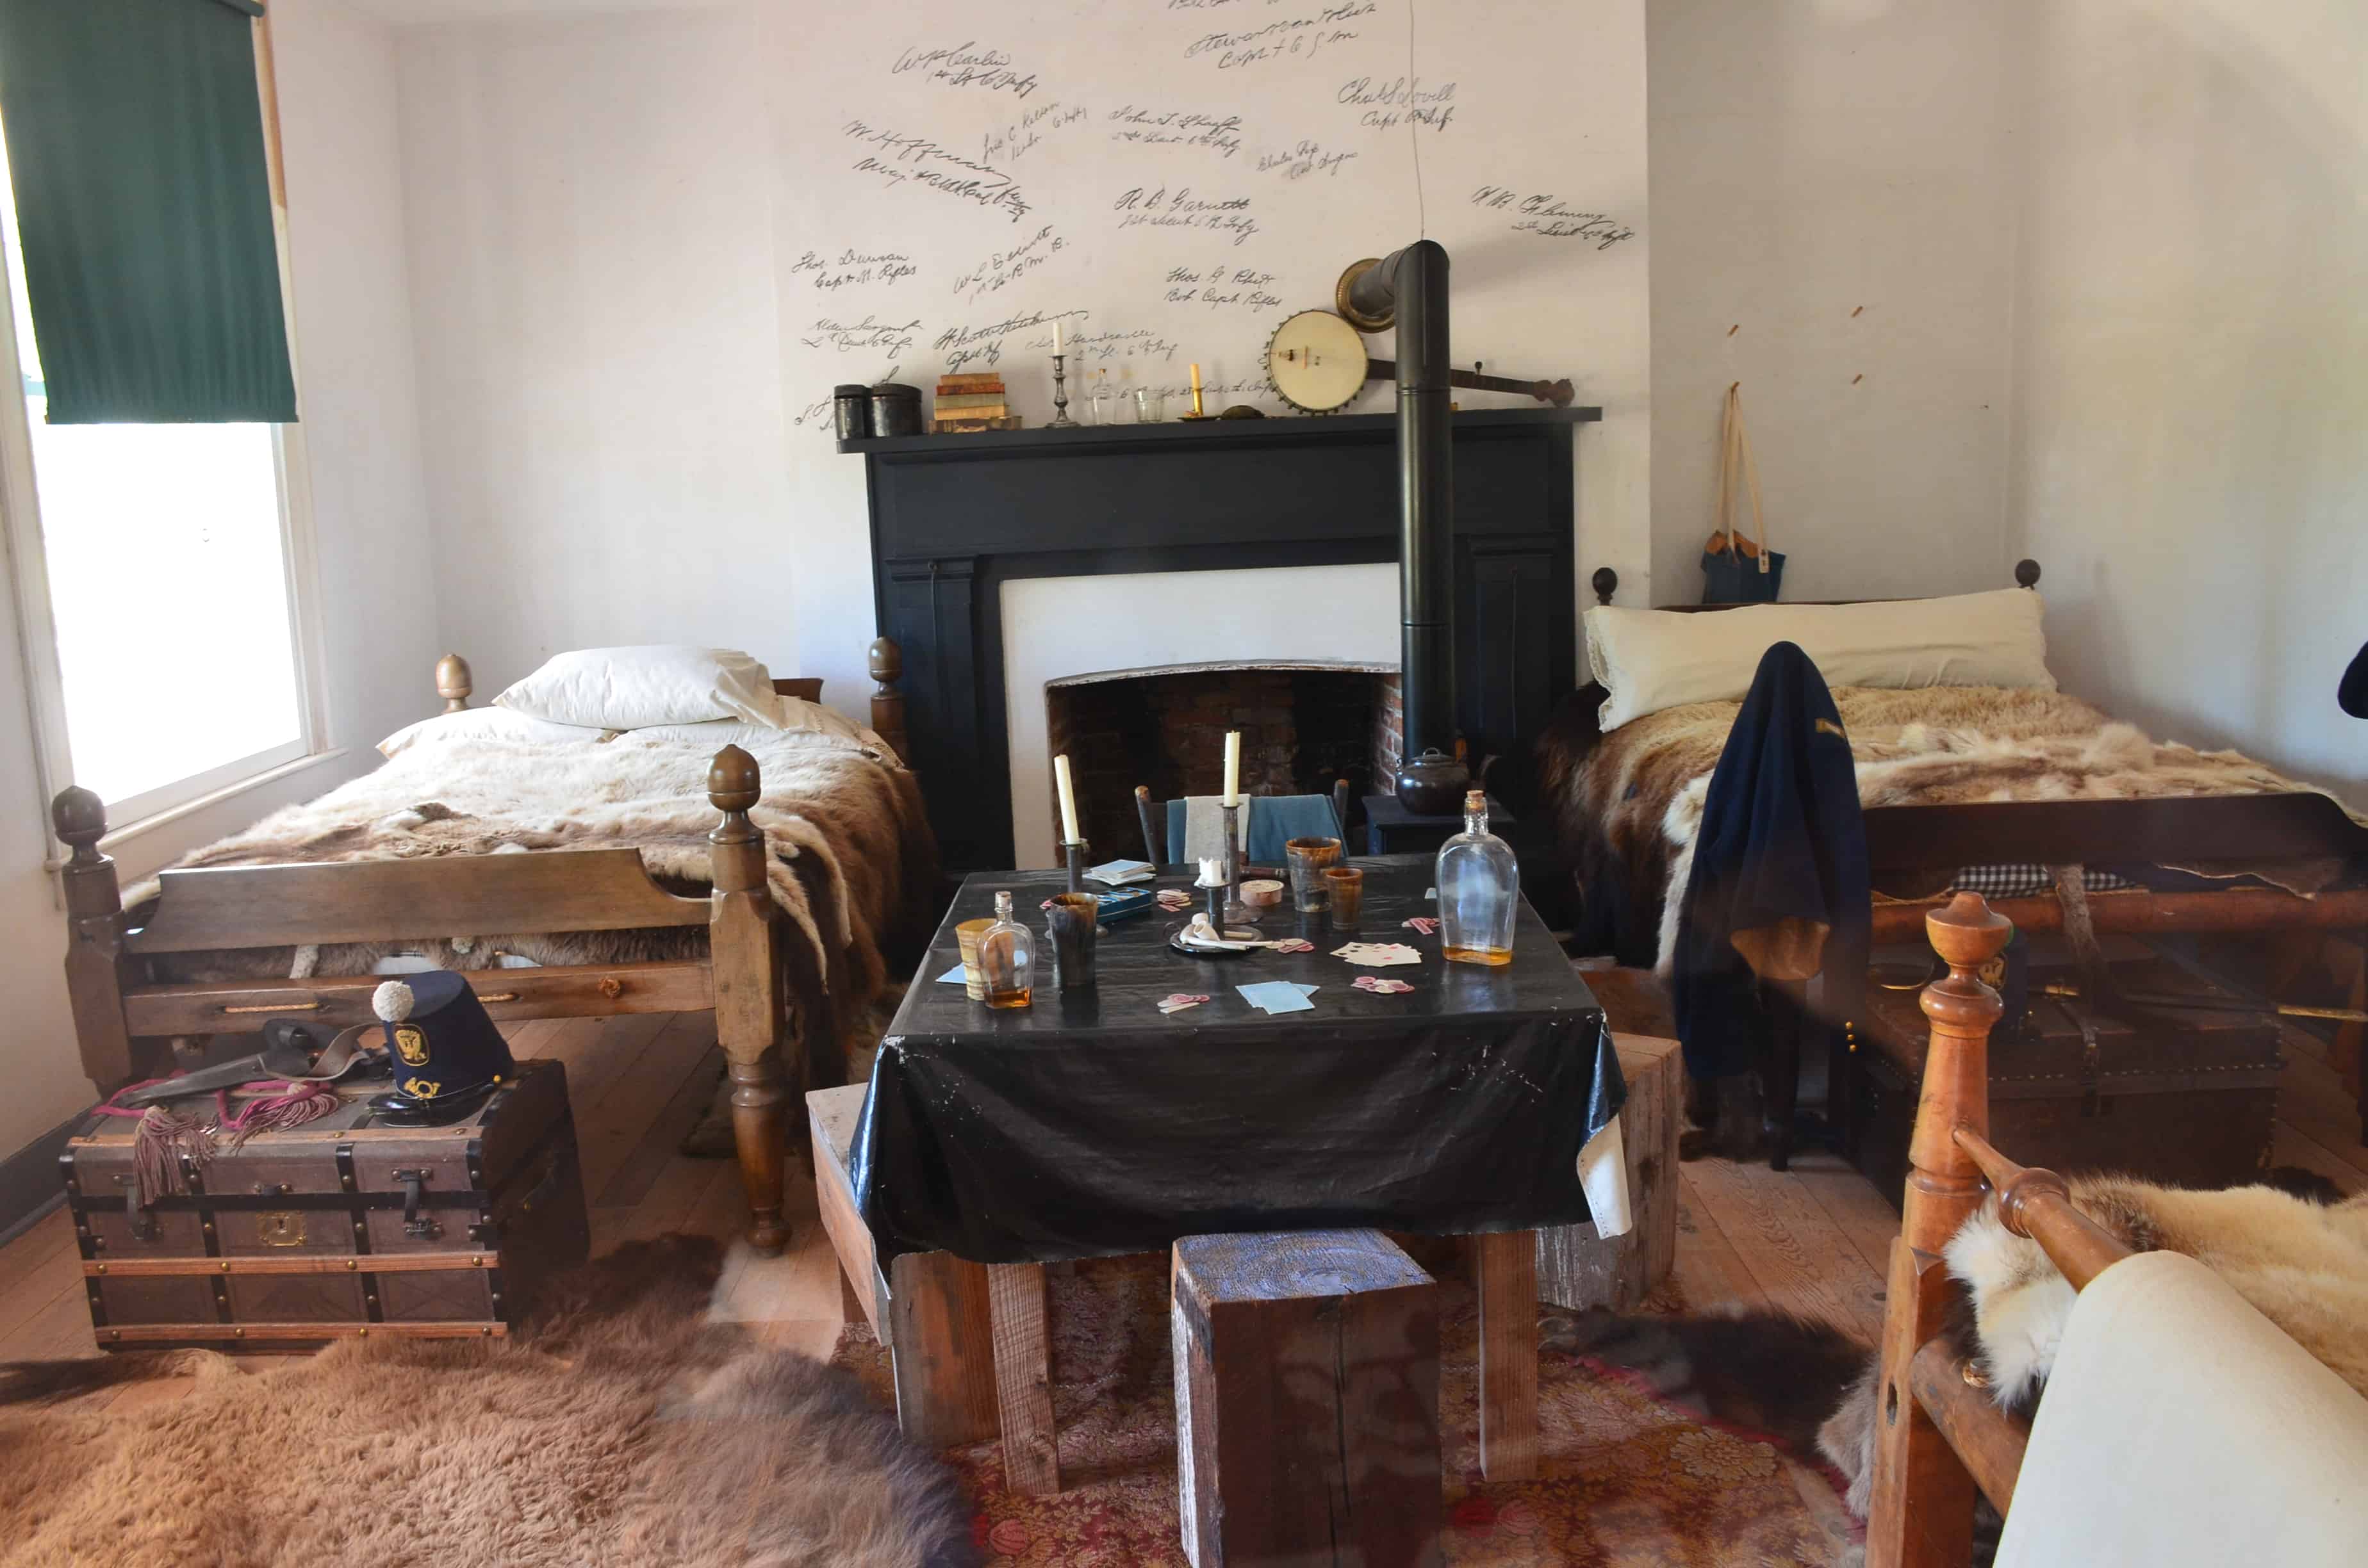 Old Bedlam at Fort Laramie National Historic Site in Wyoming